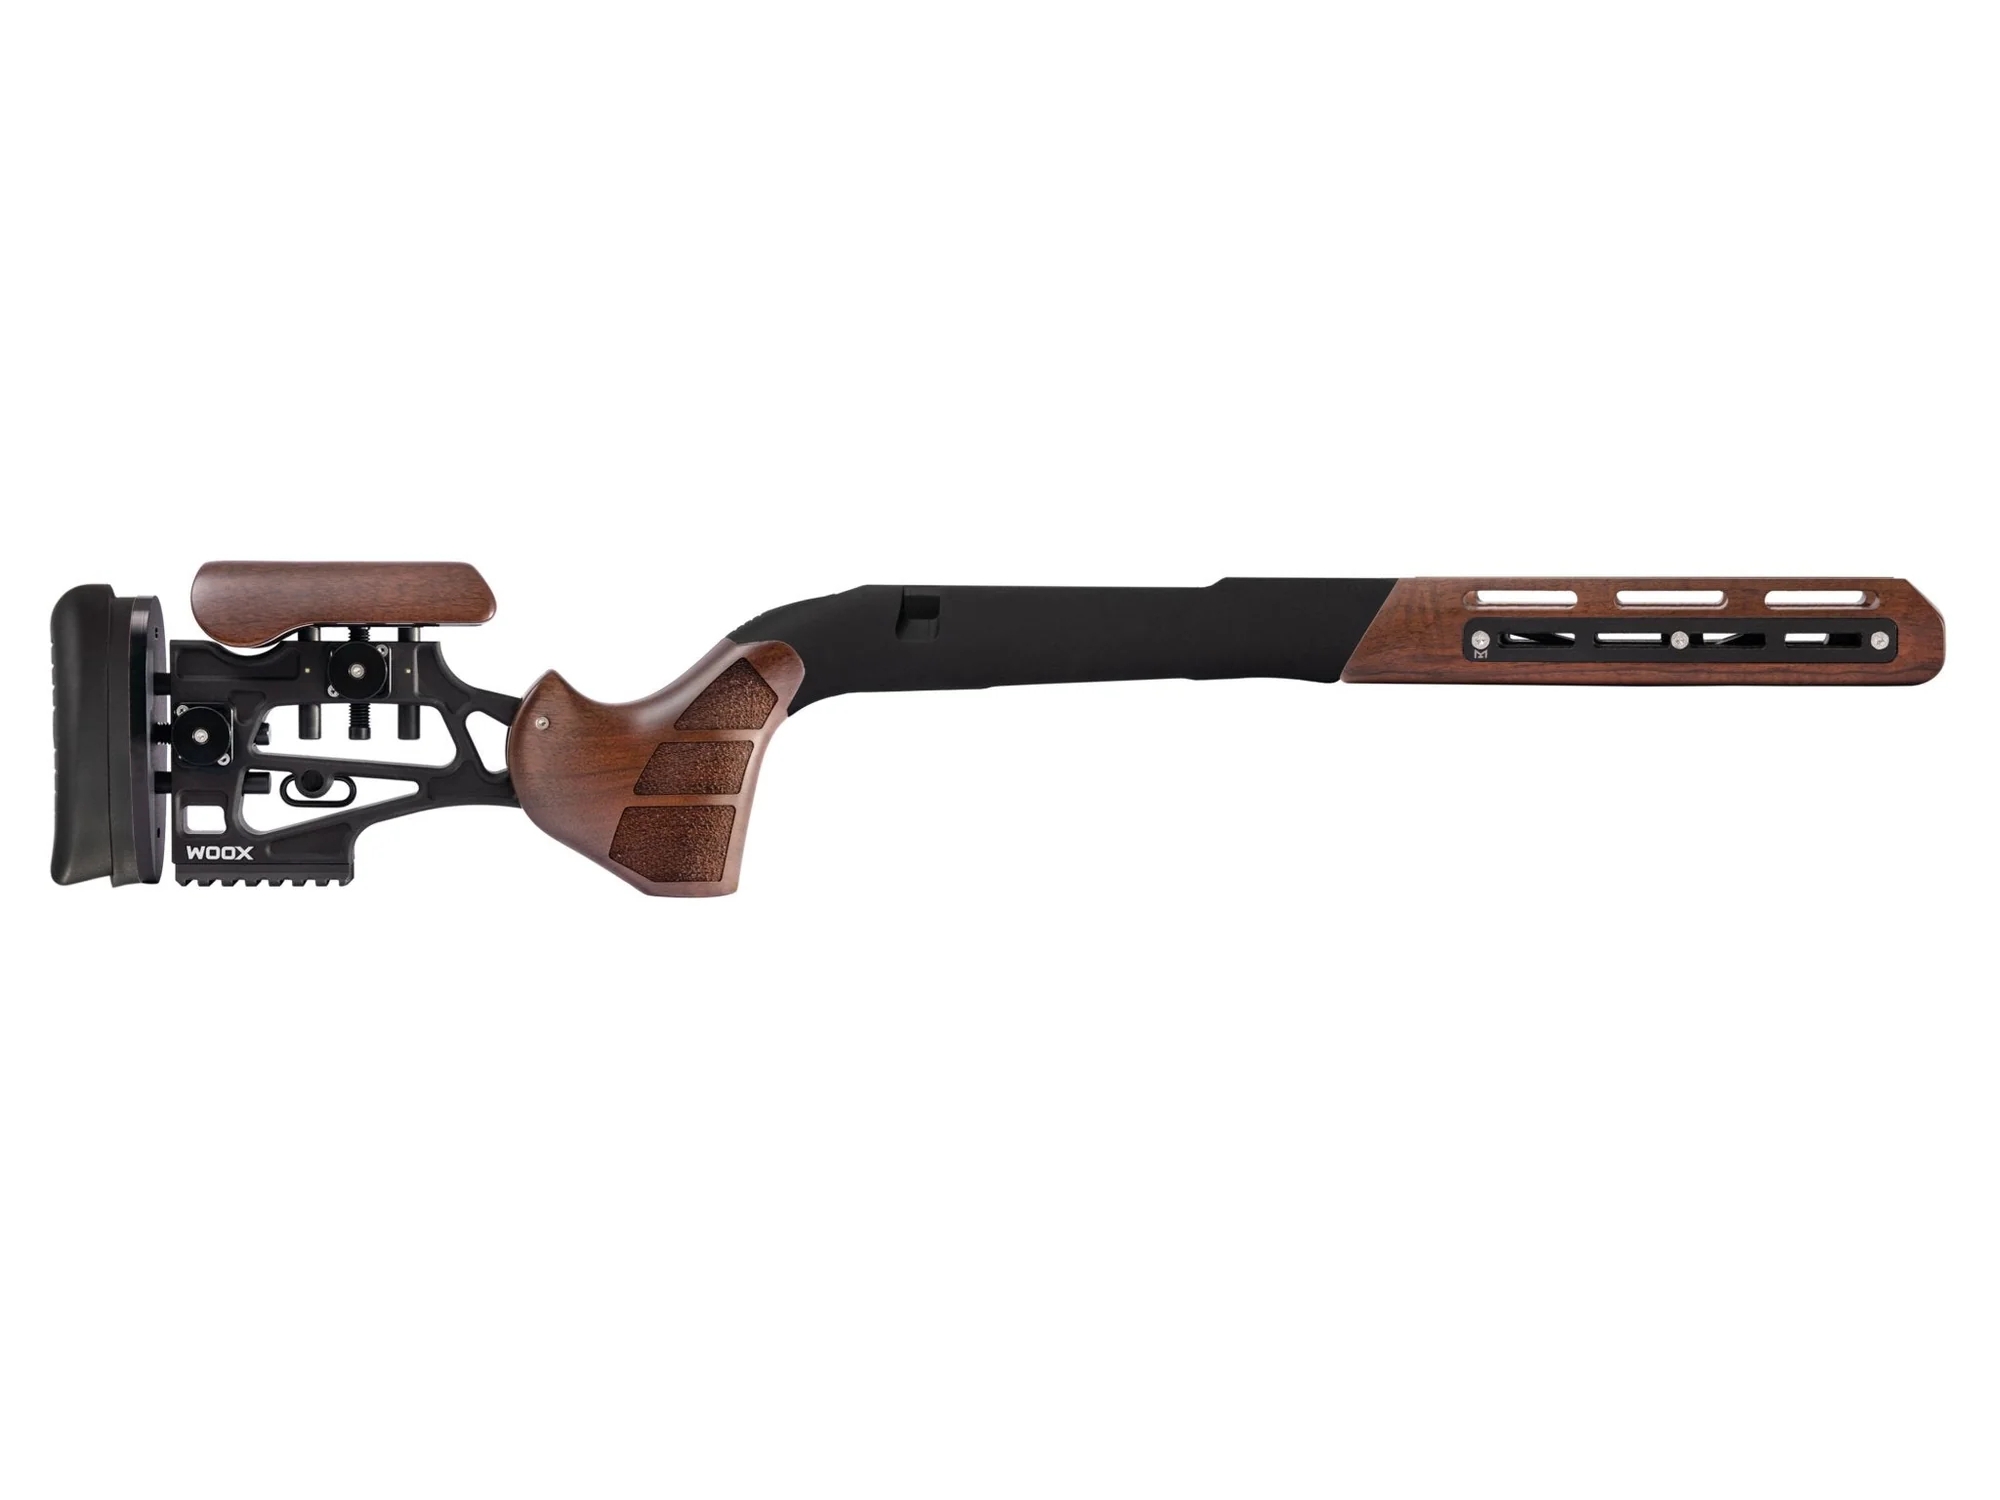 WOOX Furiosa Rifle Chassis for Ruger 10/22, Walnut